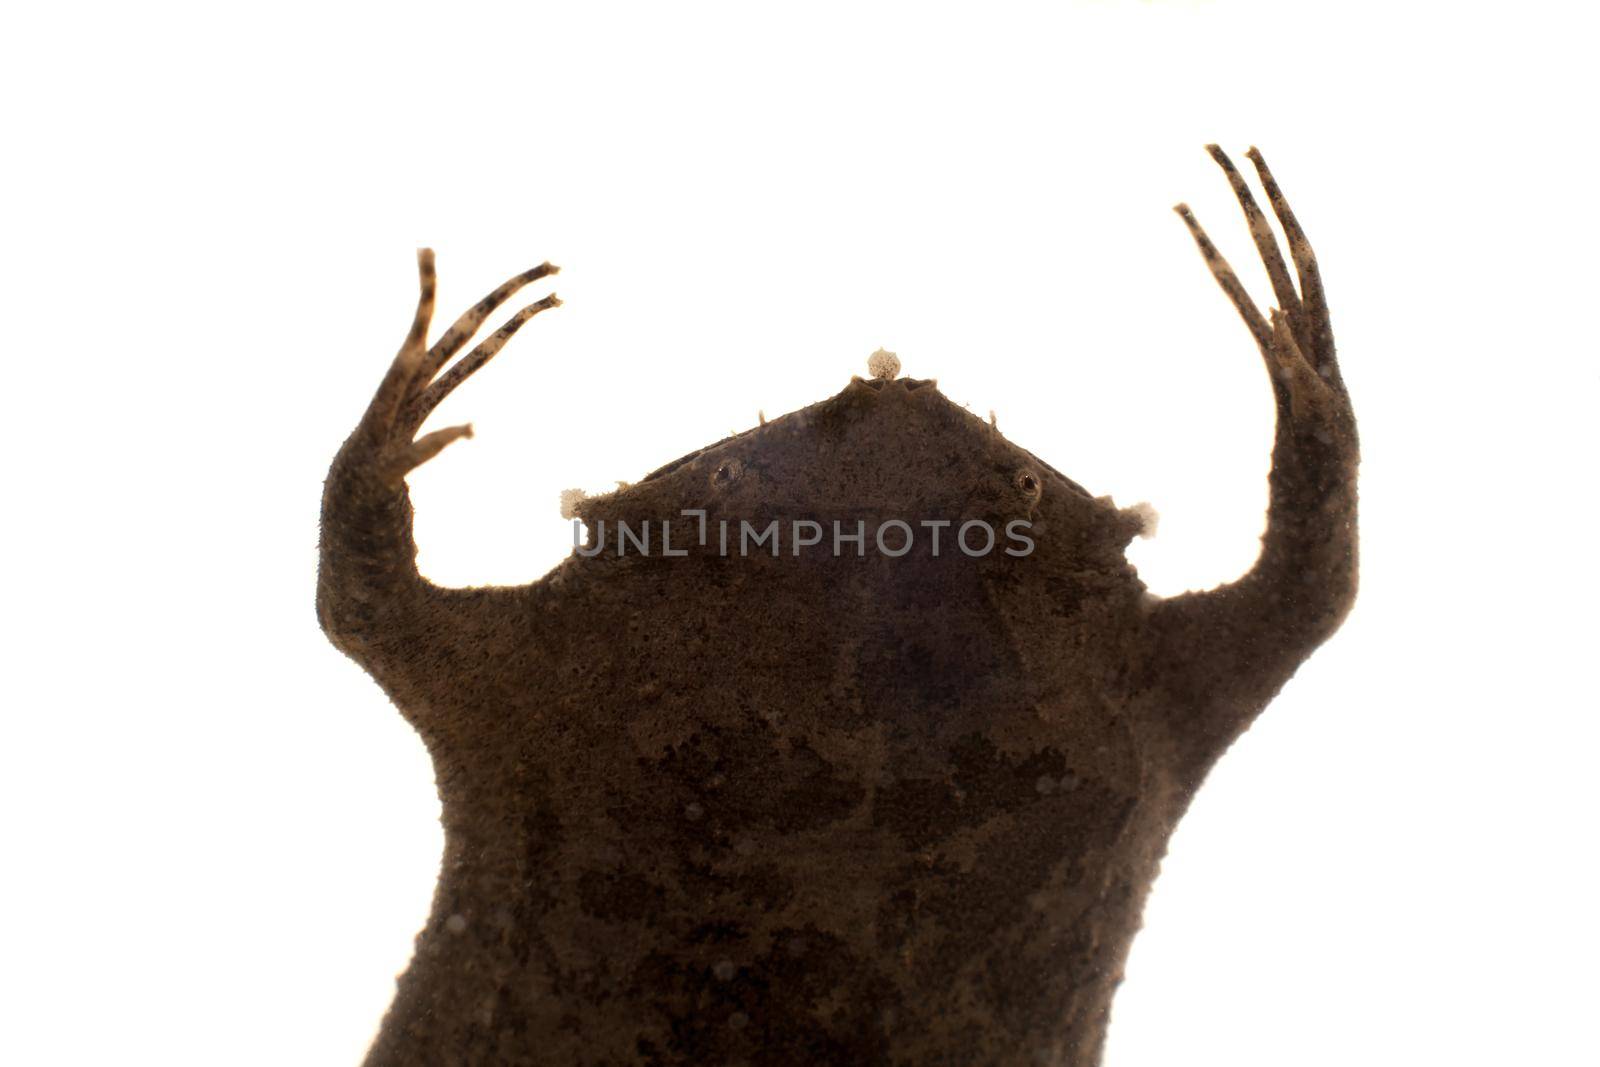 A Surinam toad, Pipa pipa, isolated on white background